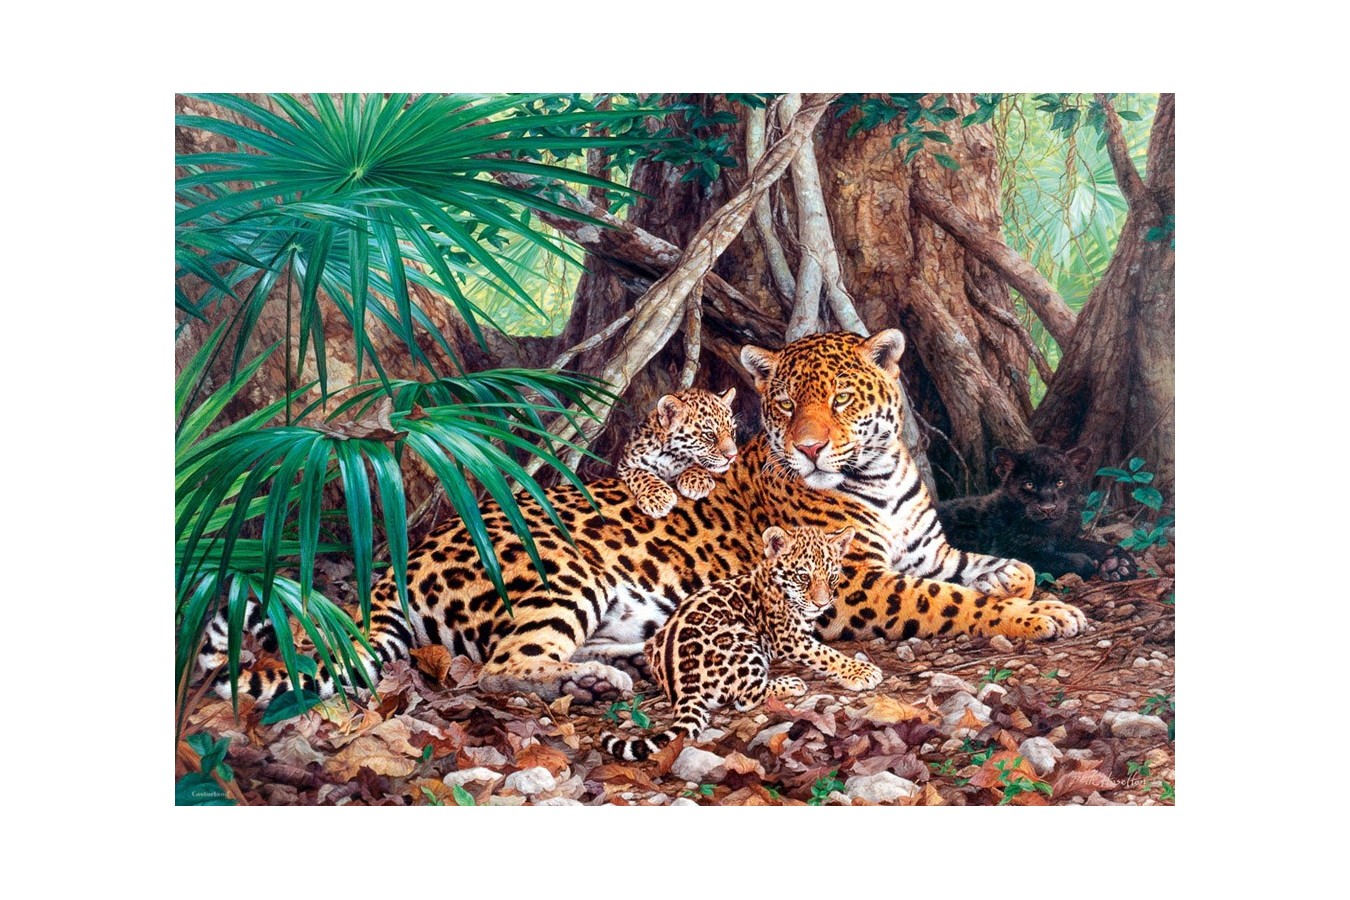 Puzzle Castorland - Jaguars in the Jungle (5904438300280), 3000 piese